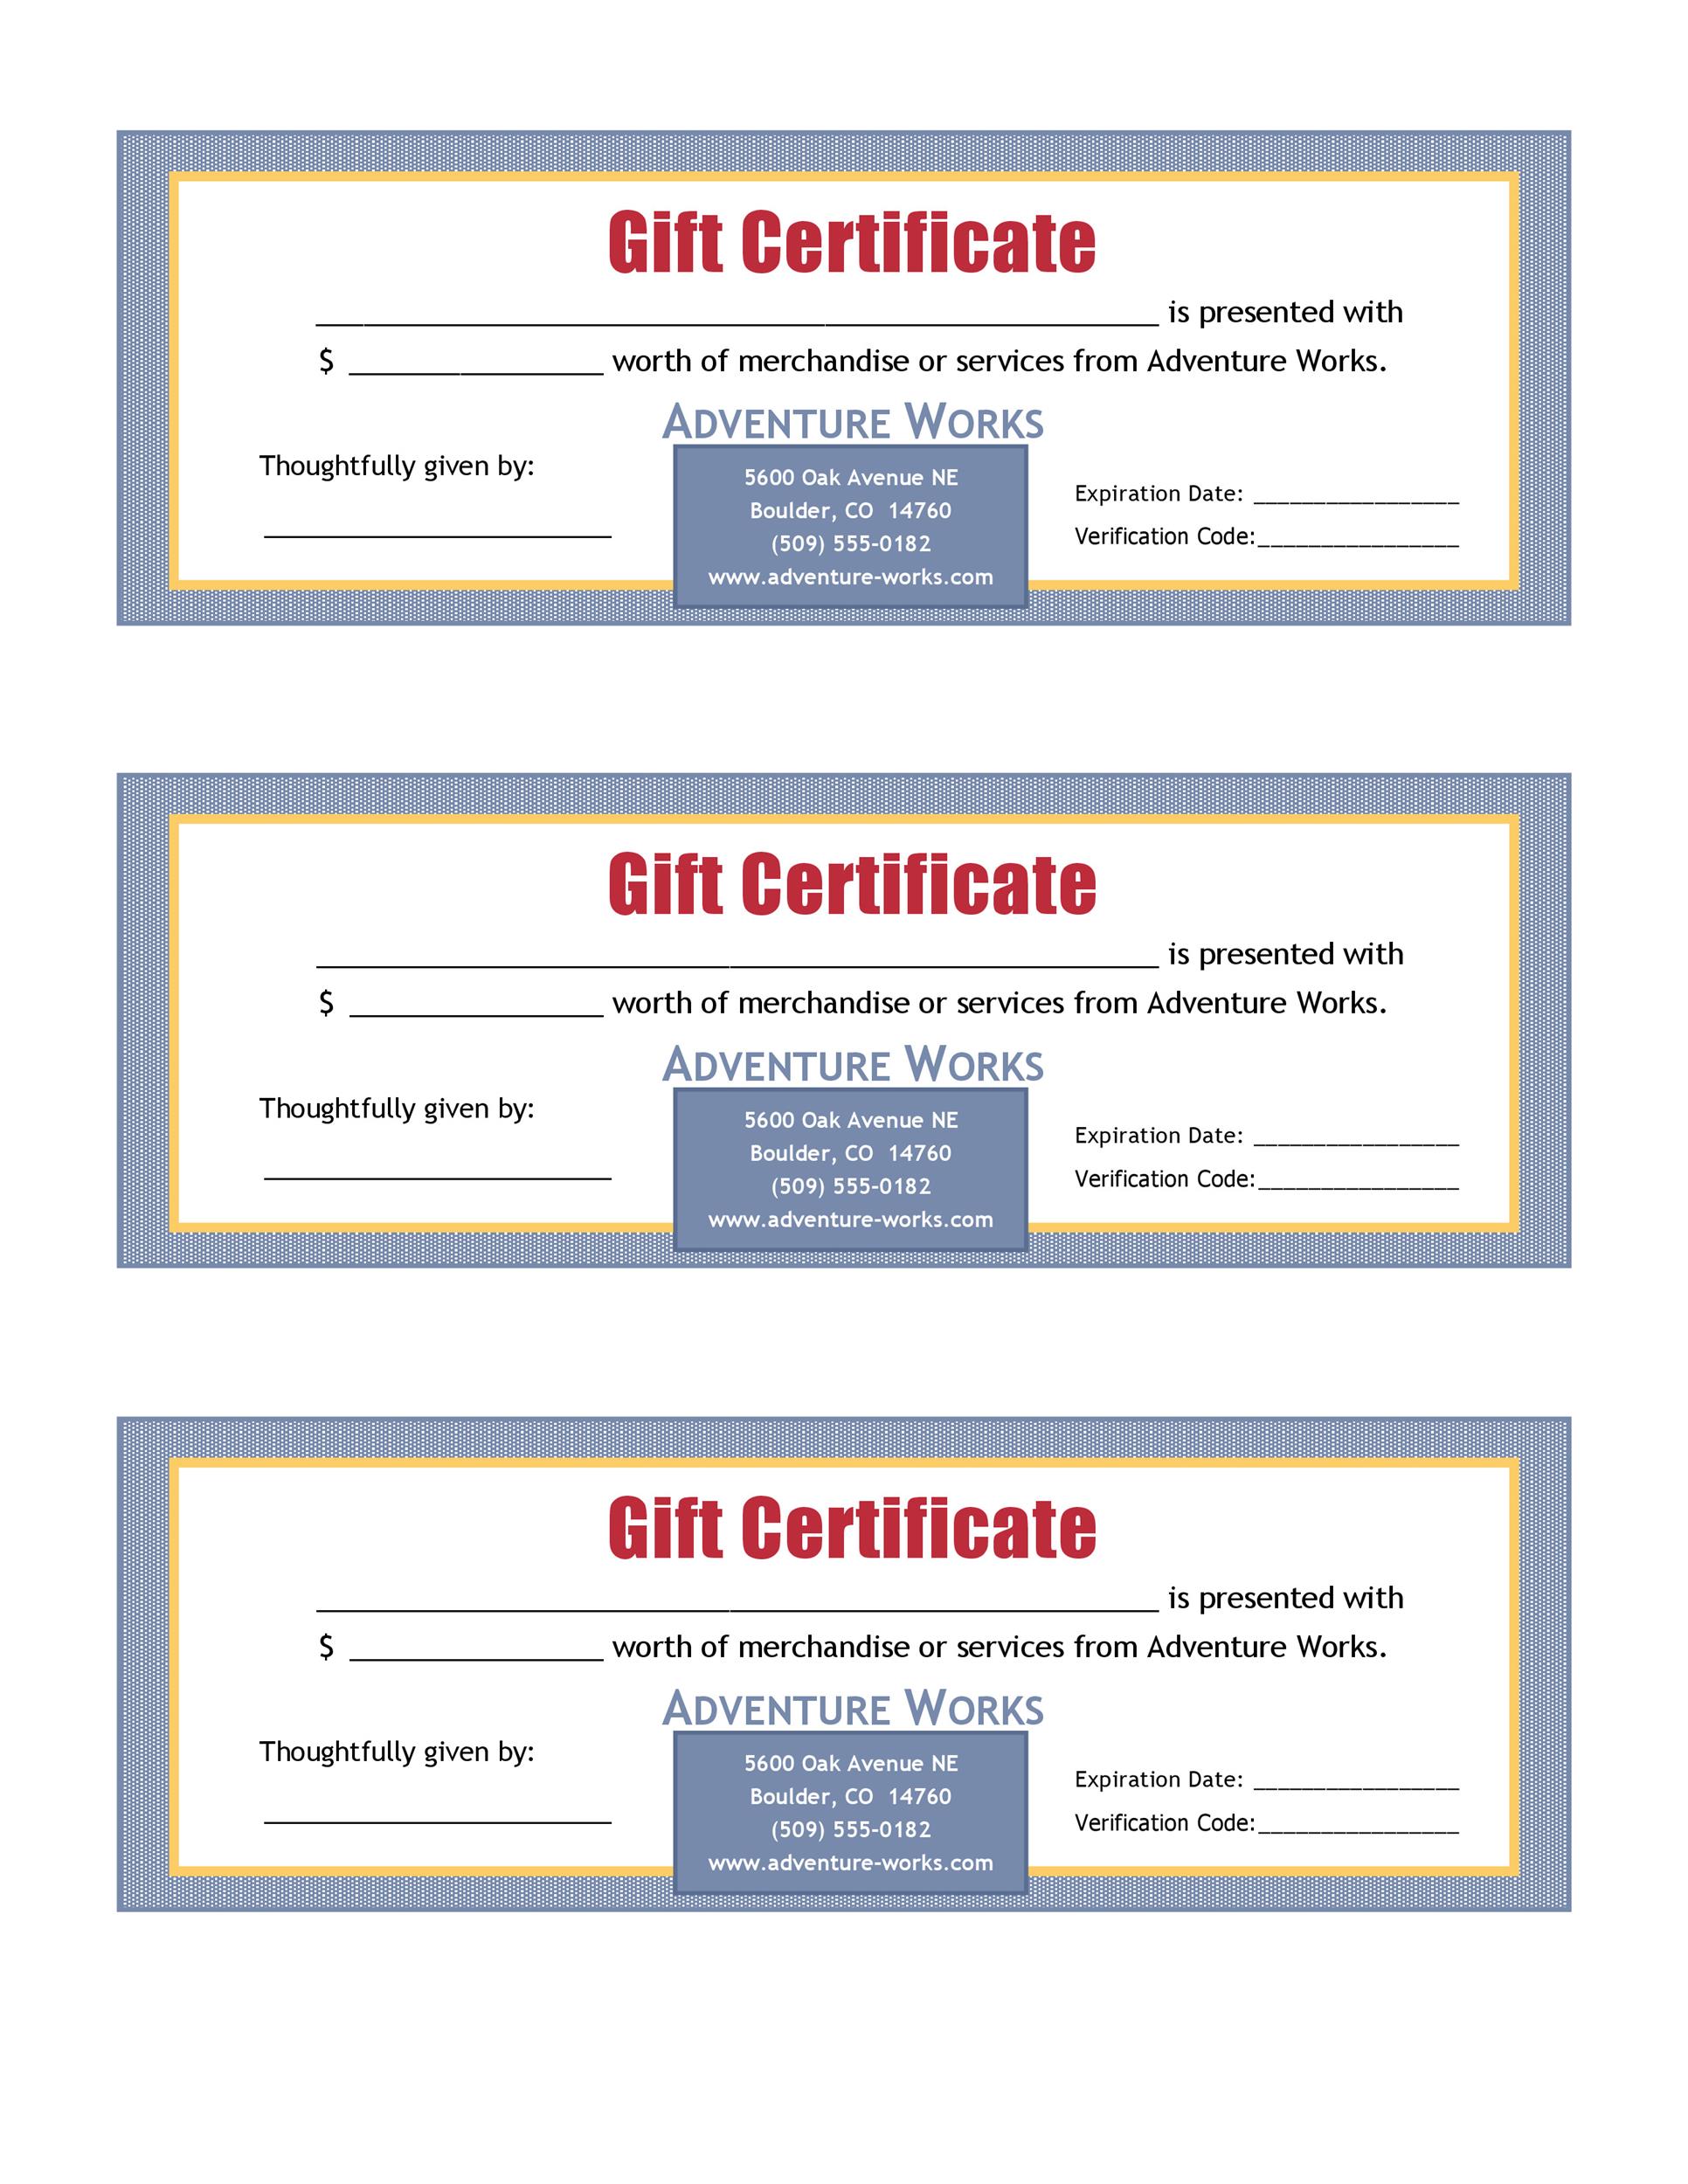 free-gift-certificate-template-50-designs-customize-online-and-print